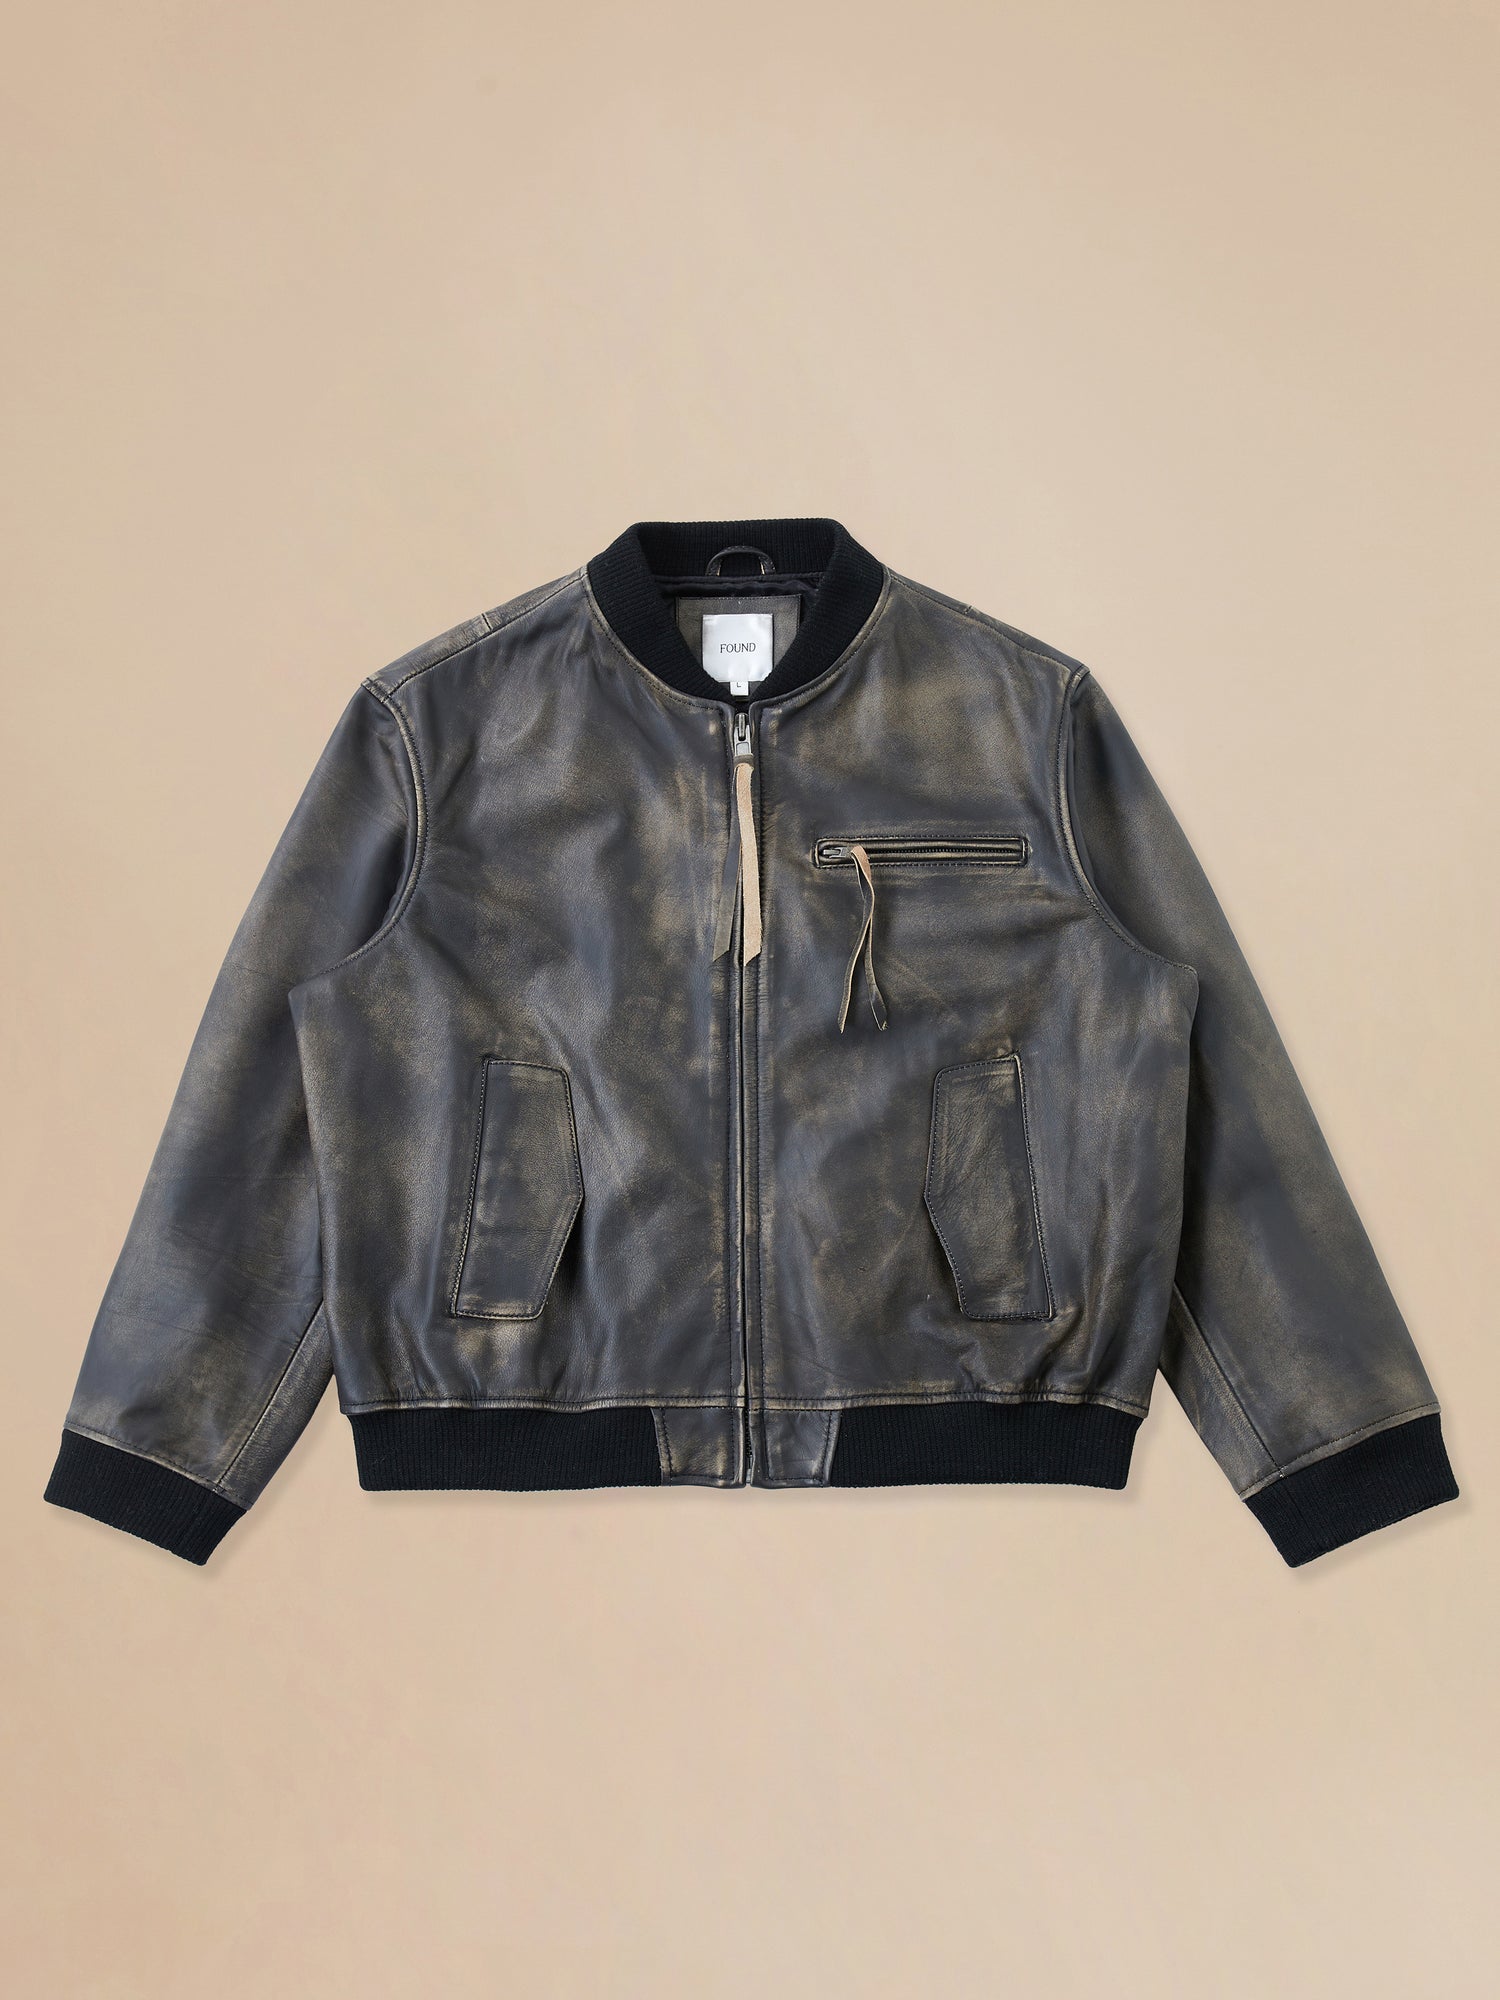 A Distressed Pavement Leather Bomber Jacket by Found on a beige background.